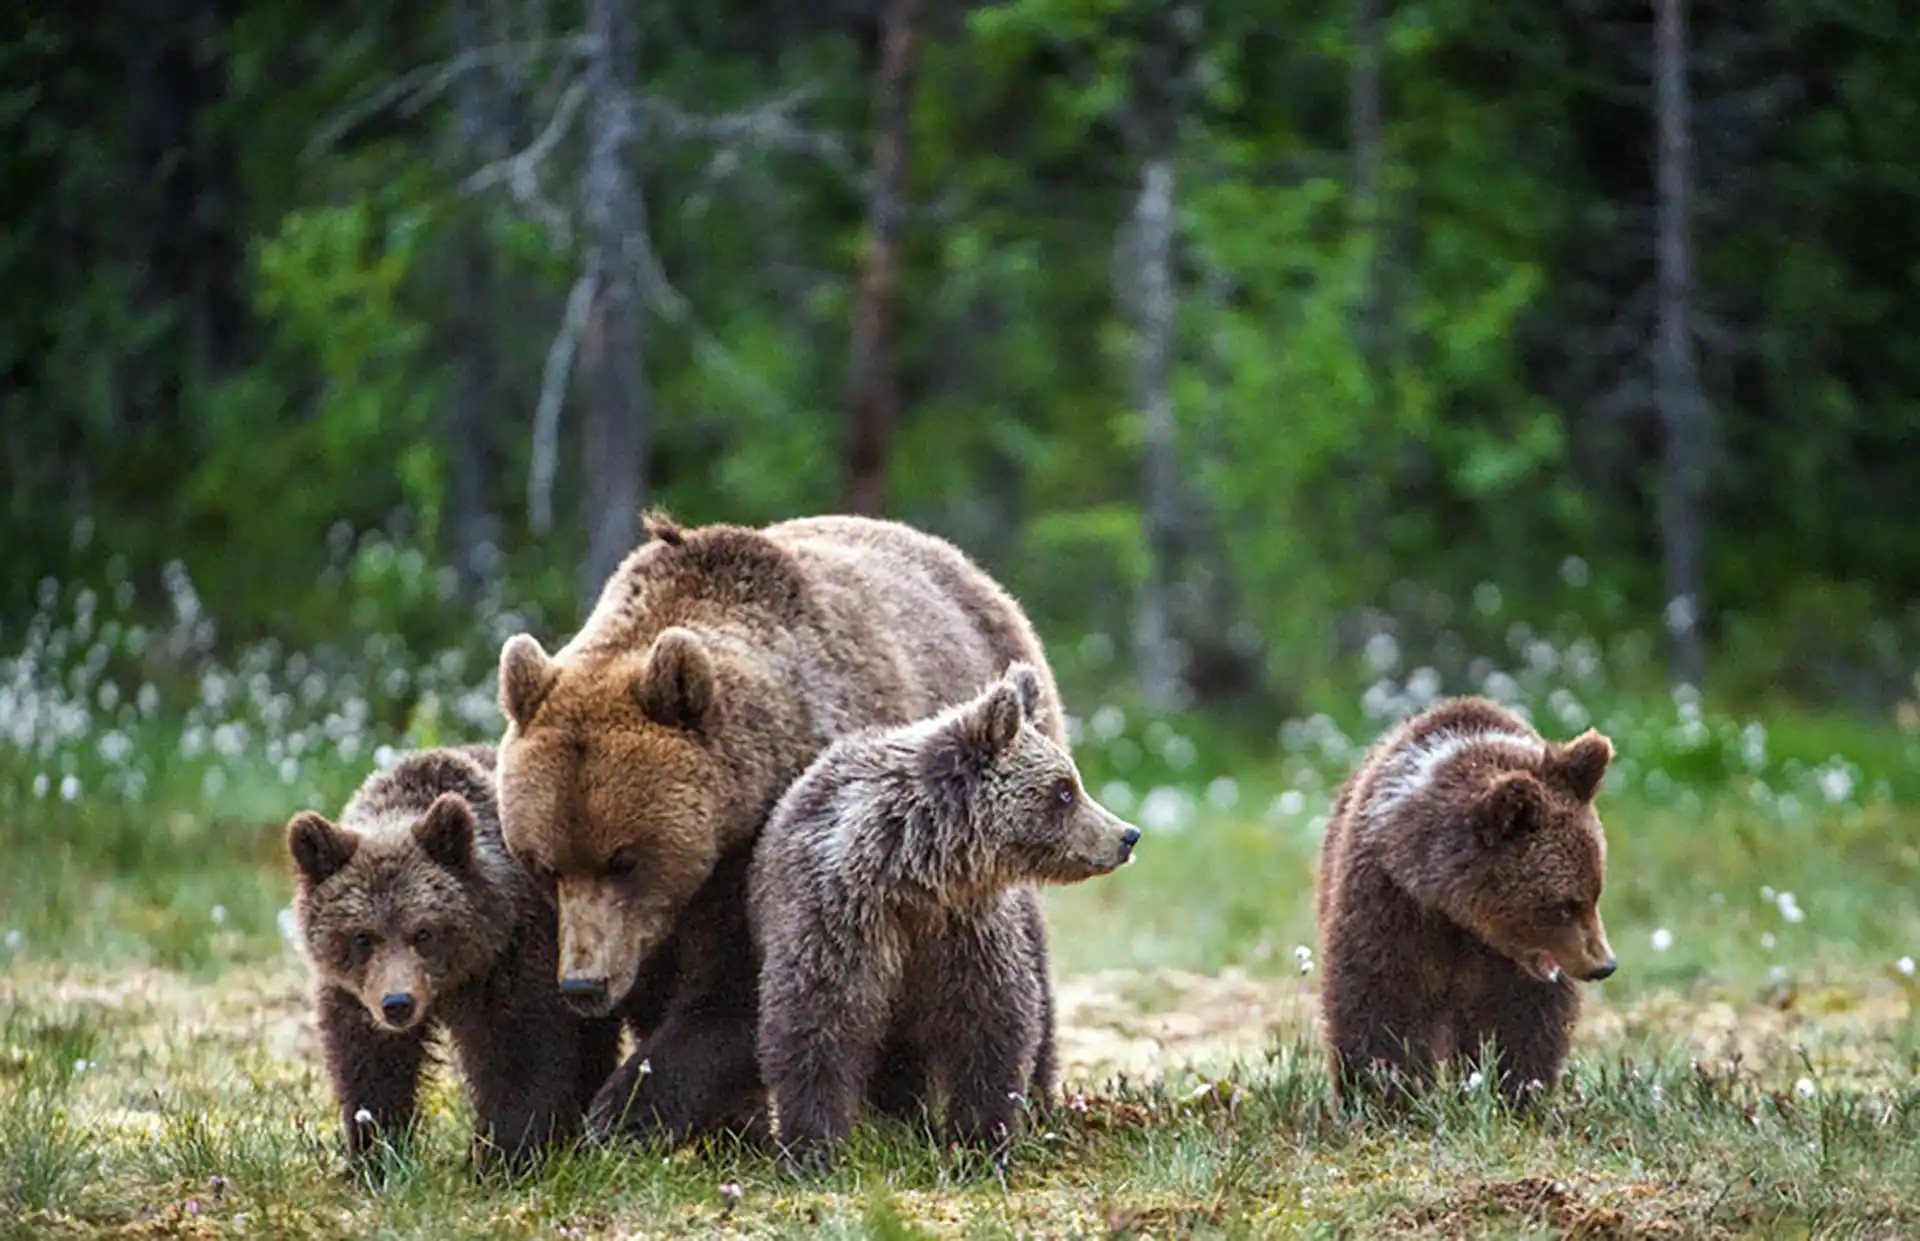 fortress-of-the-bear-mother-bear-cubs